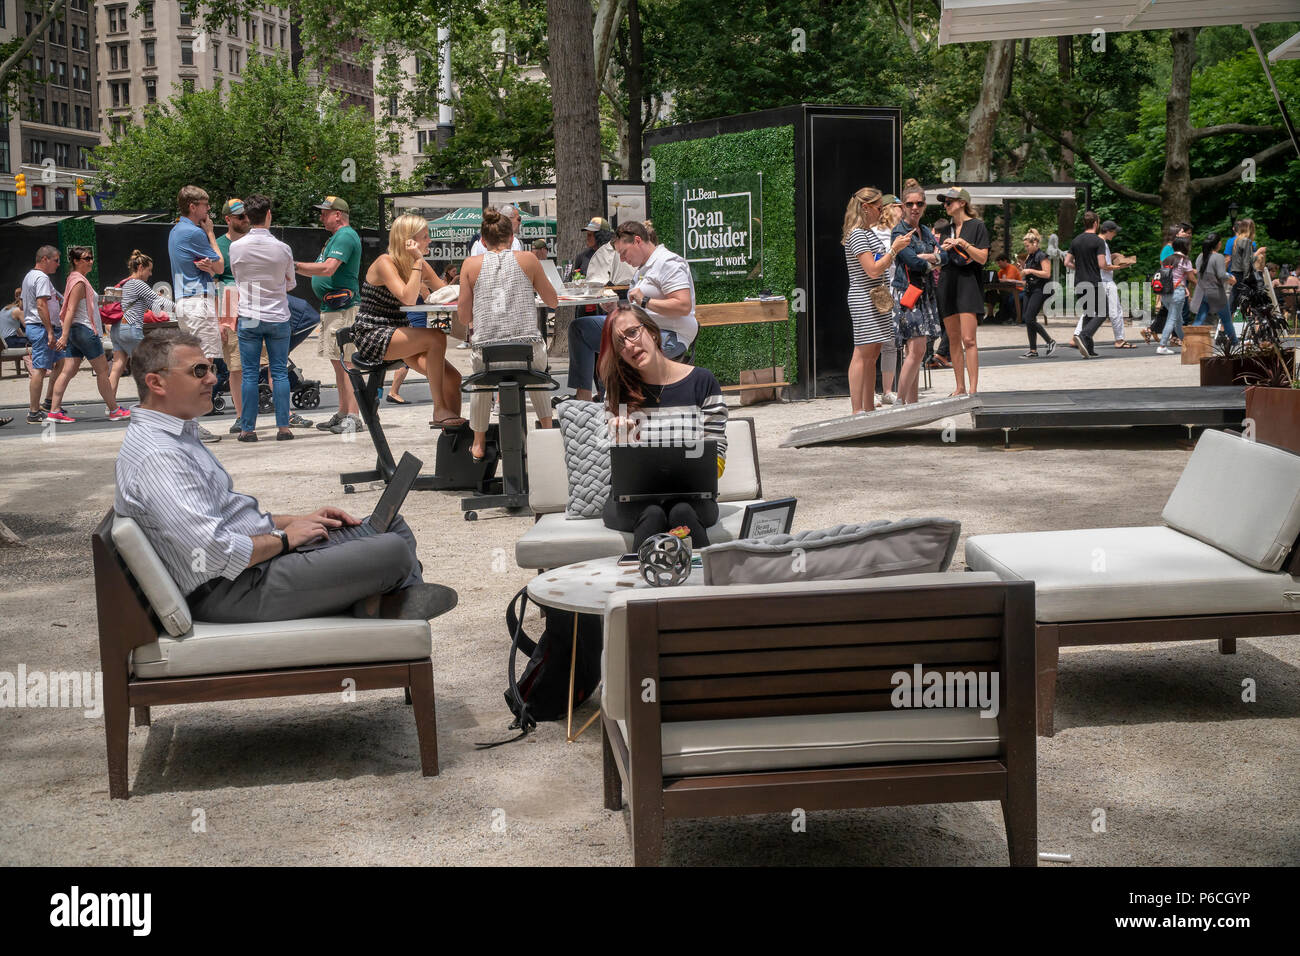 Workers in Madison Square Park in New York enjoy being outdoors at the L.L. Bean Outdoors' 'Be an Outsider at Work' pop-up co-working space on Thursday June 21, 2018. Promoting an outdoor lifestyle and reacting to research that shows workers between the ages of 22-65 spend 95 percent of their time outdoors the outdoor goods retailer created their portable pop-up office complete with a complement of comfortable office furniture and wi-fi. The busy branding event attracted many people for meetings and just to work on their laptops and was lucky enough not to be on a day where New York's oppressi Stock Photo